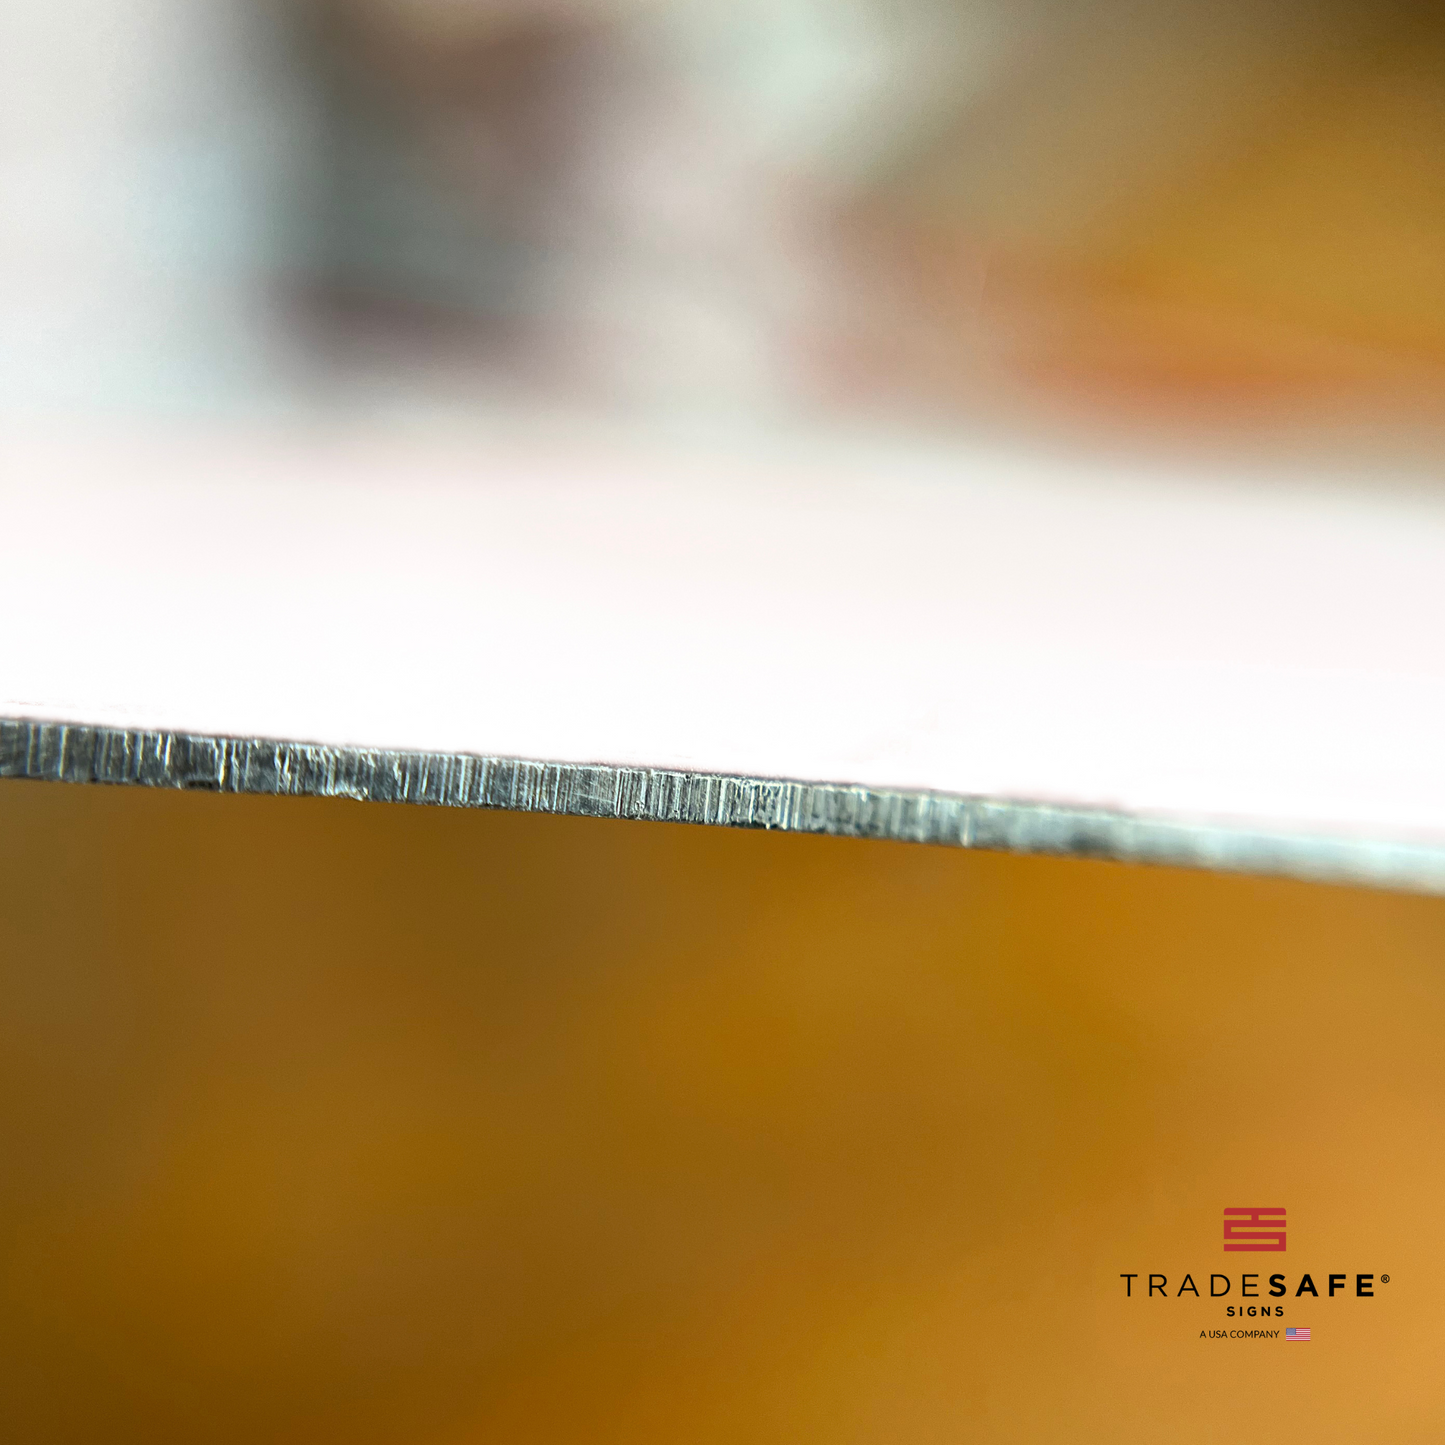 thickness of tradesafe's sign